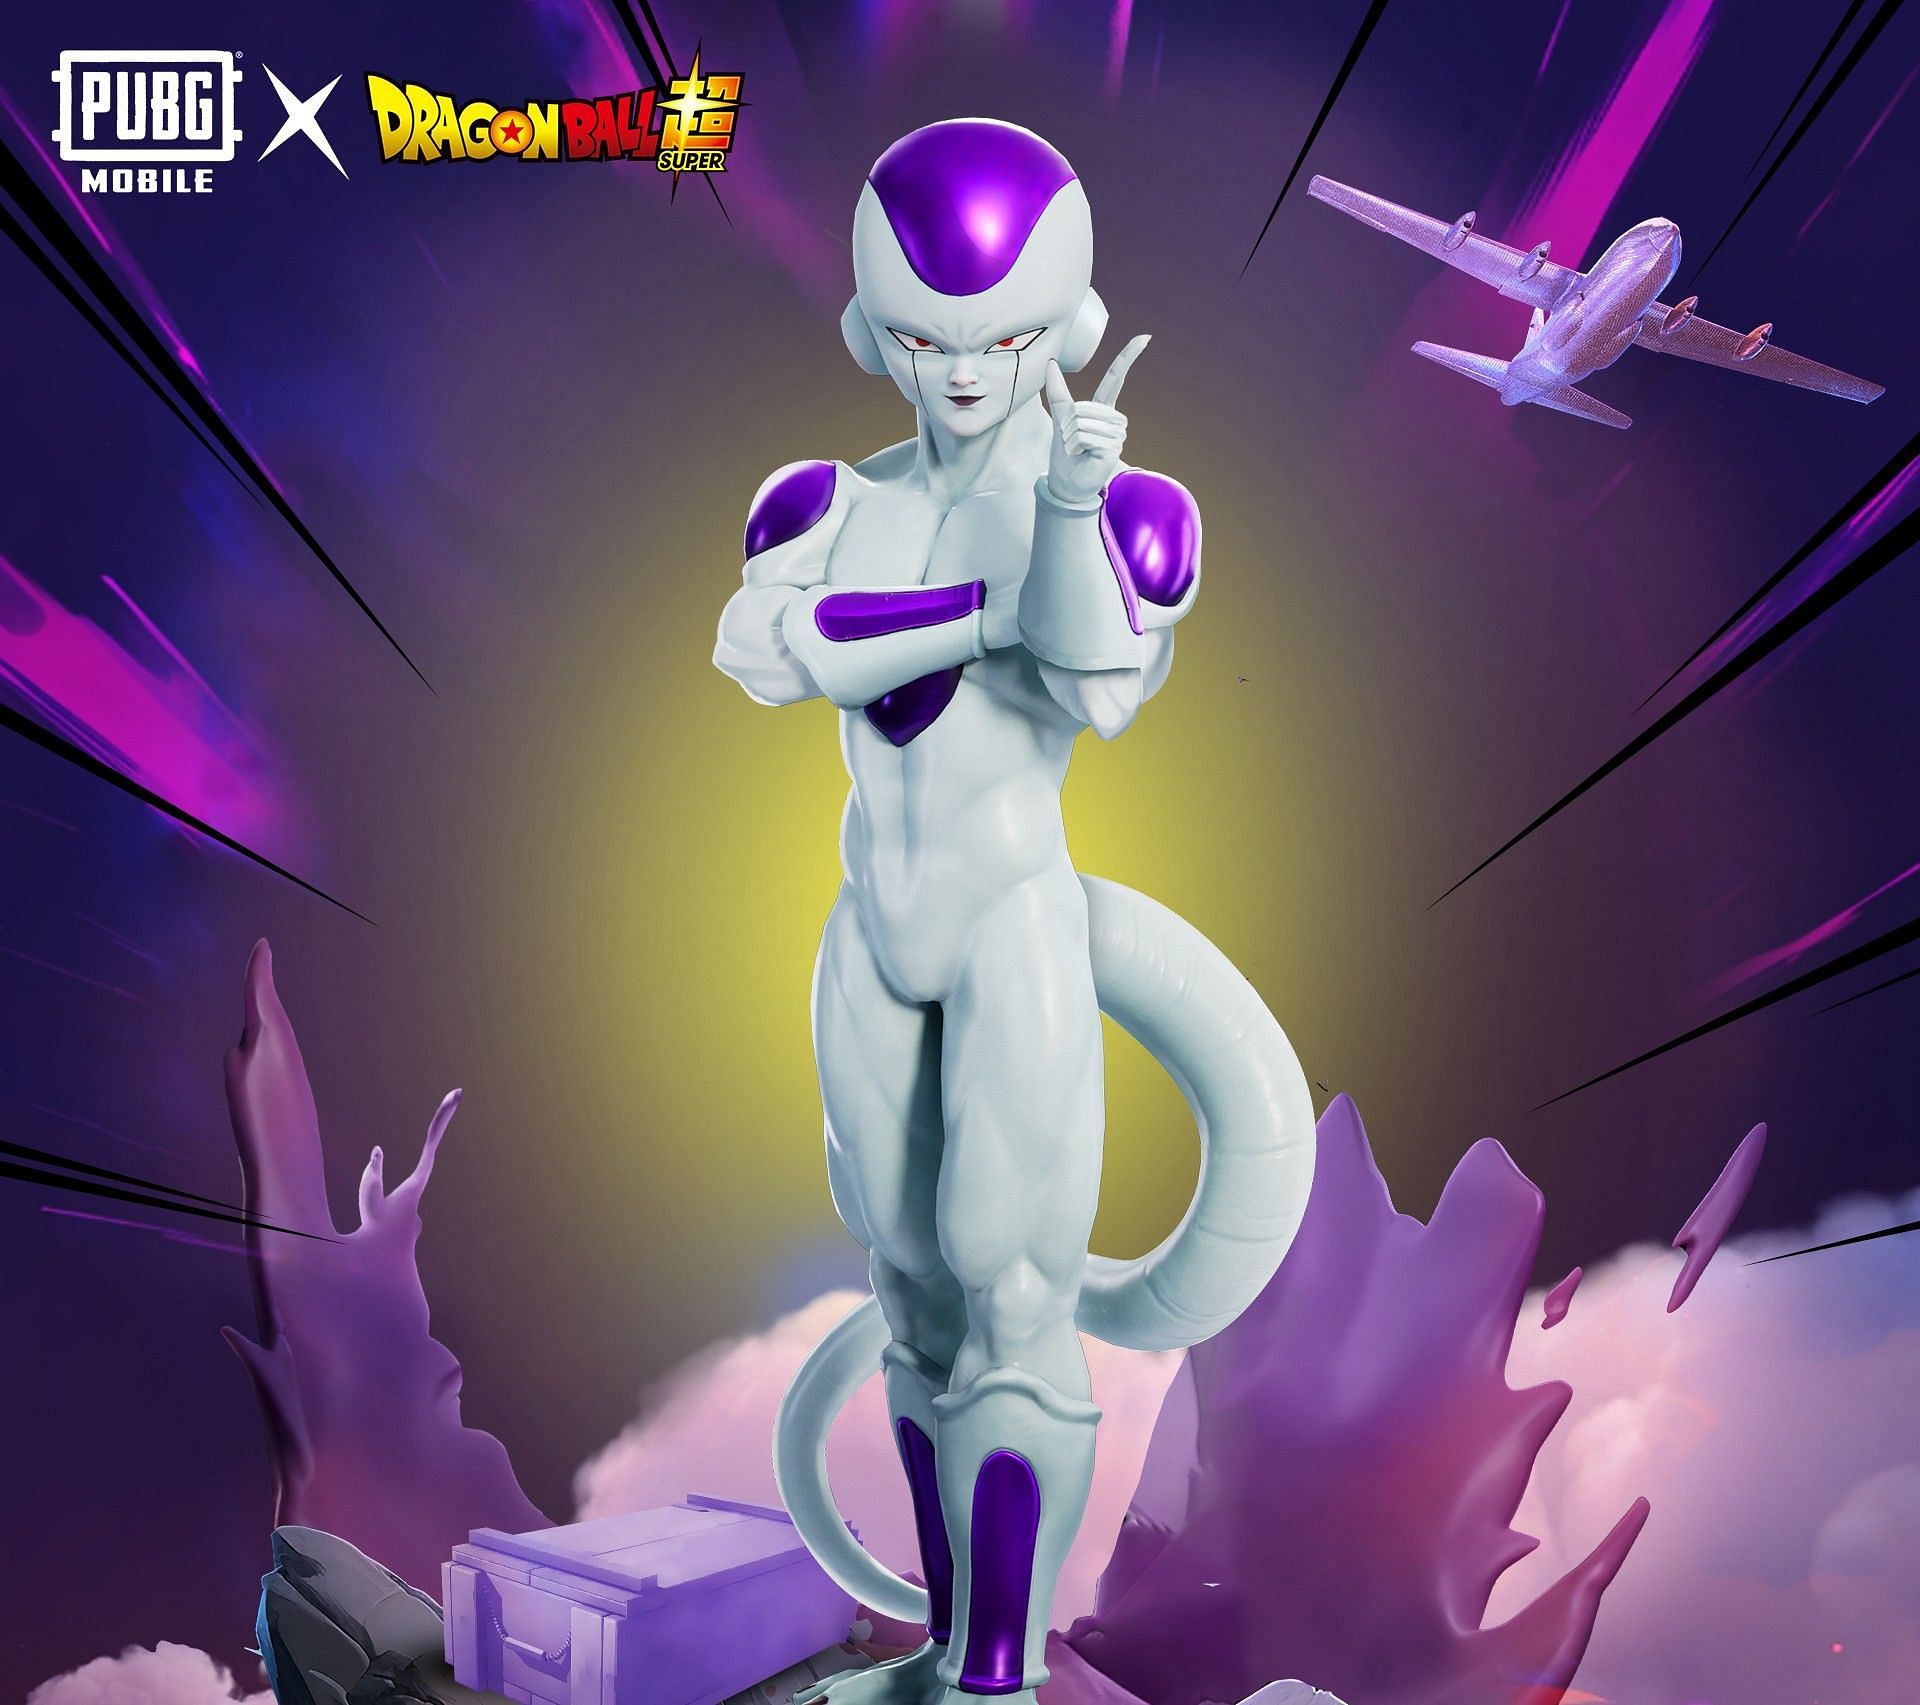 Frieza from Dragon Ball Super in the game (Image via Tencent Games)